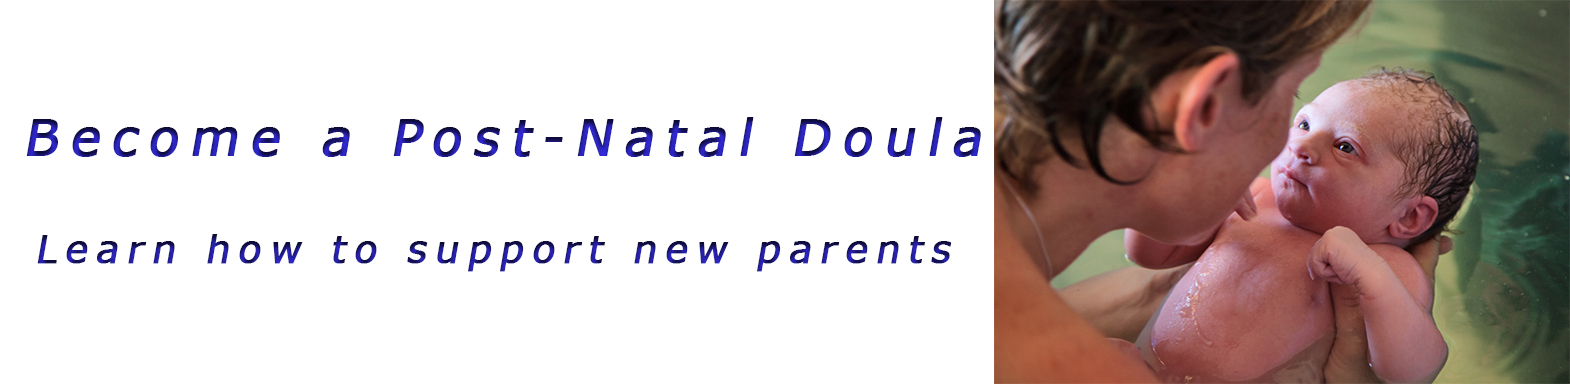 Become a Post-Natal Doula - Learn how to support new parents